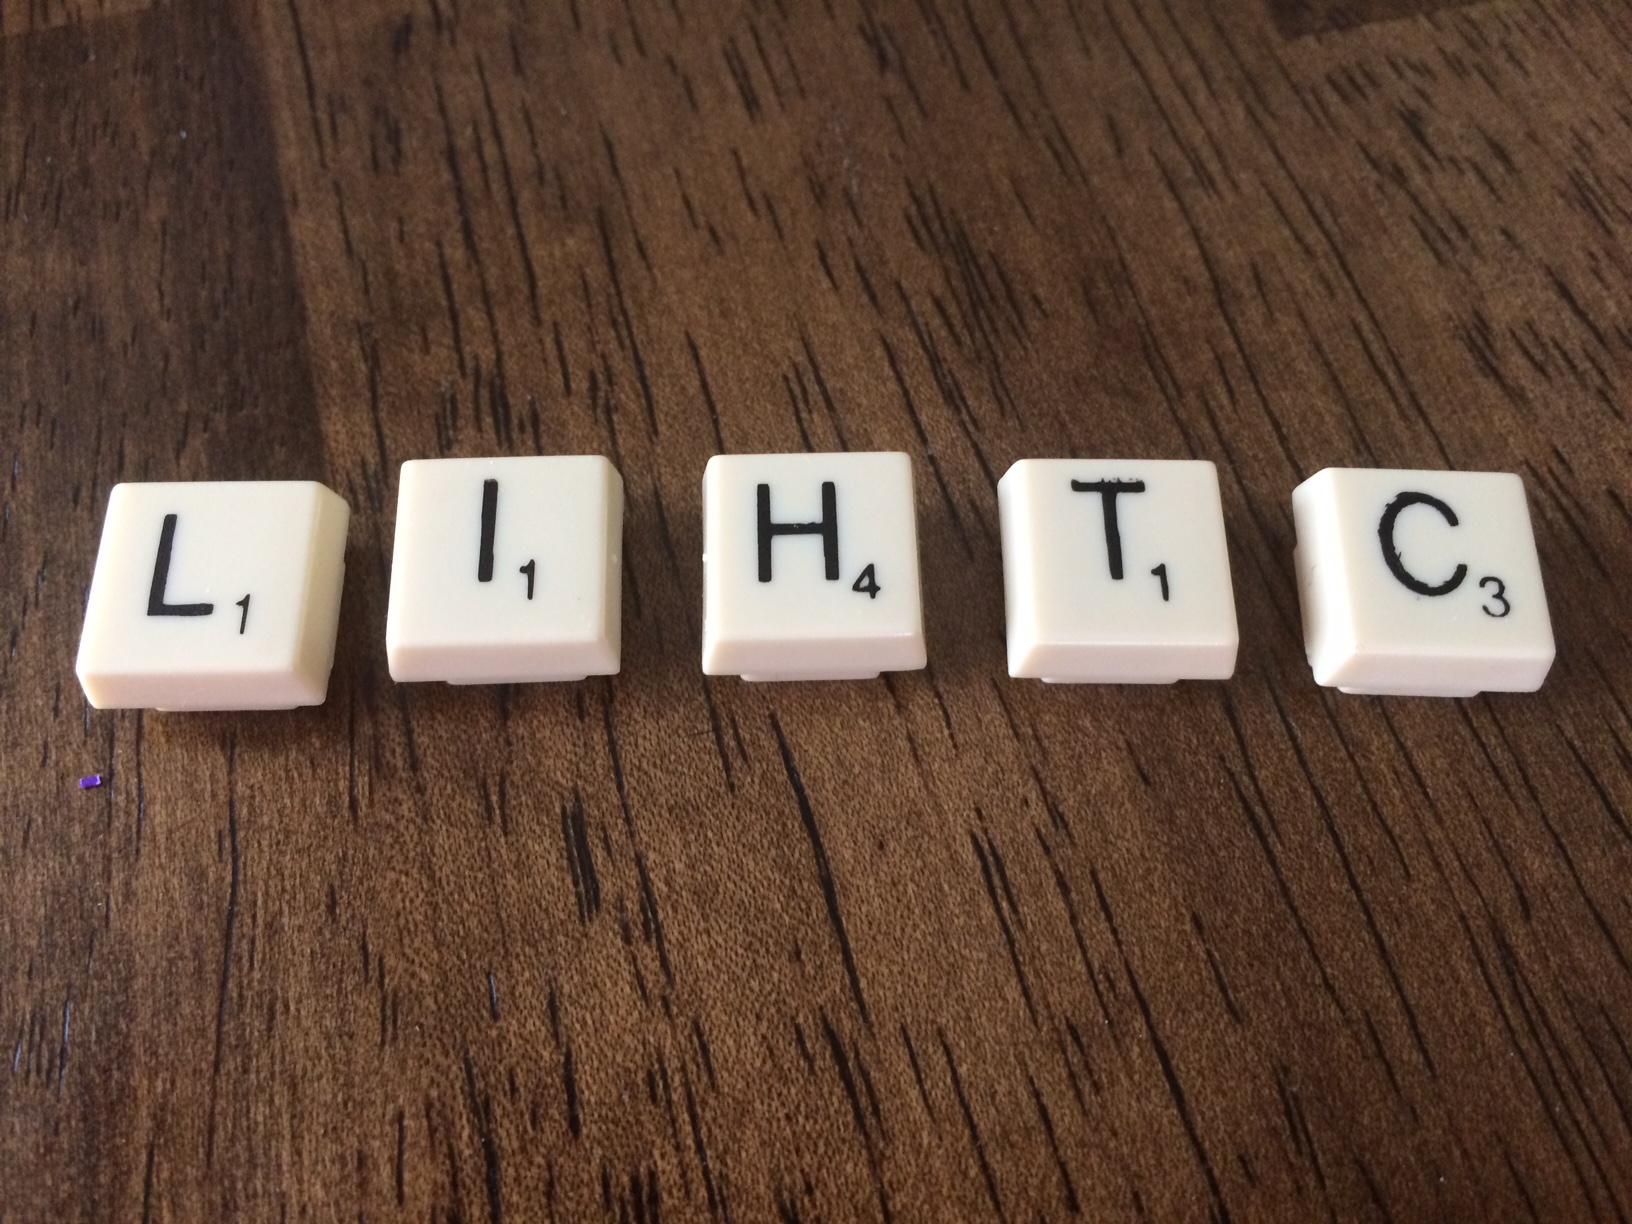 Scrabble pieces spelling out LIHTC